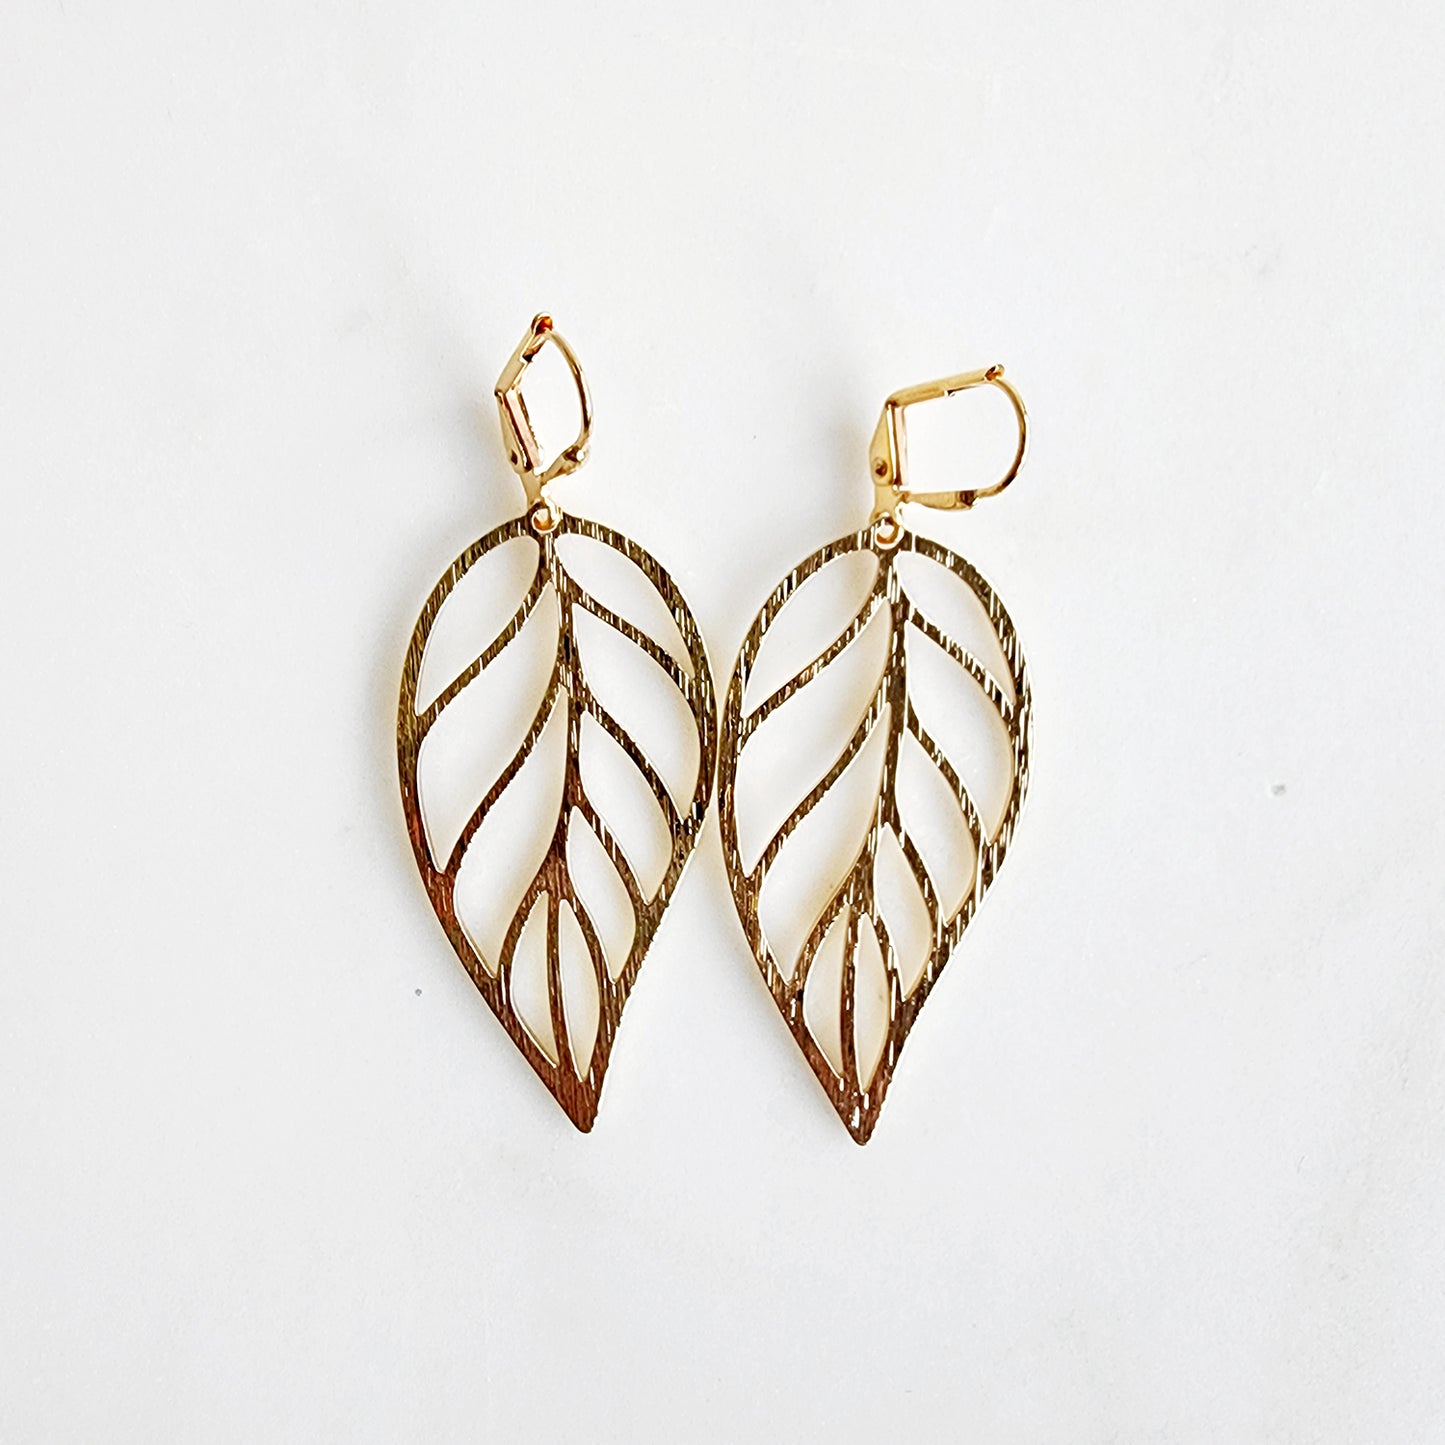 Leaf Statement Earrings in Brushed Brass Gold